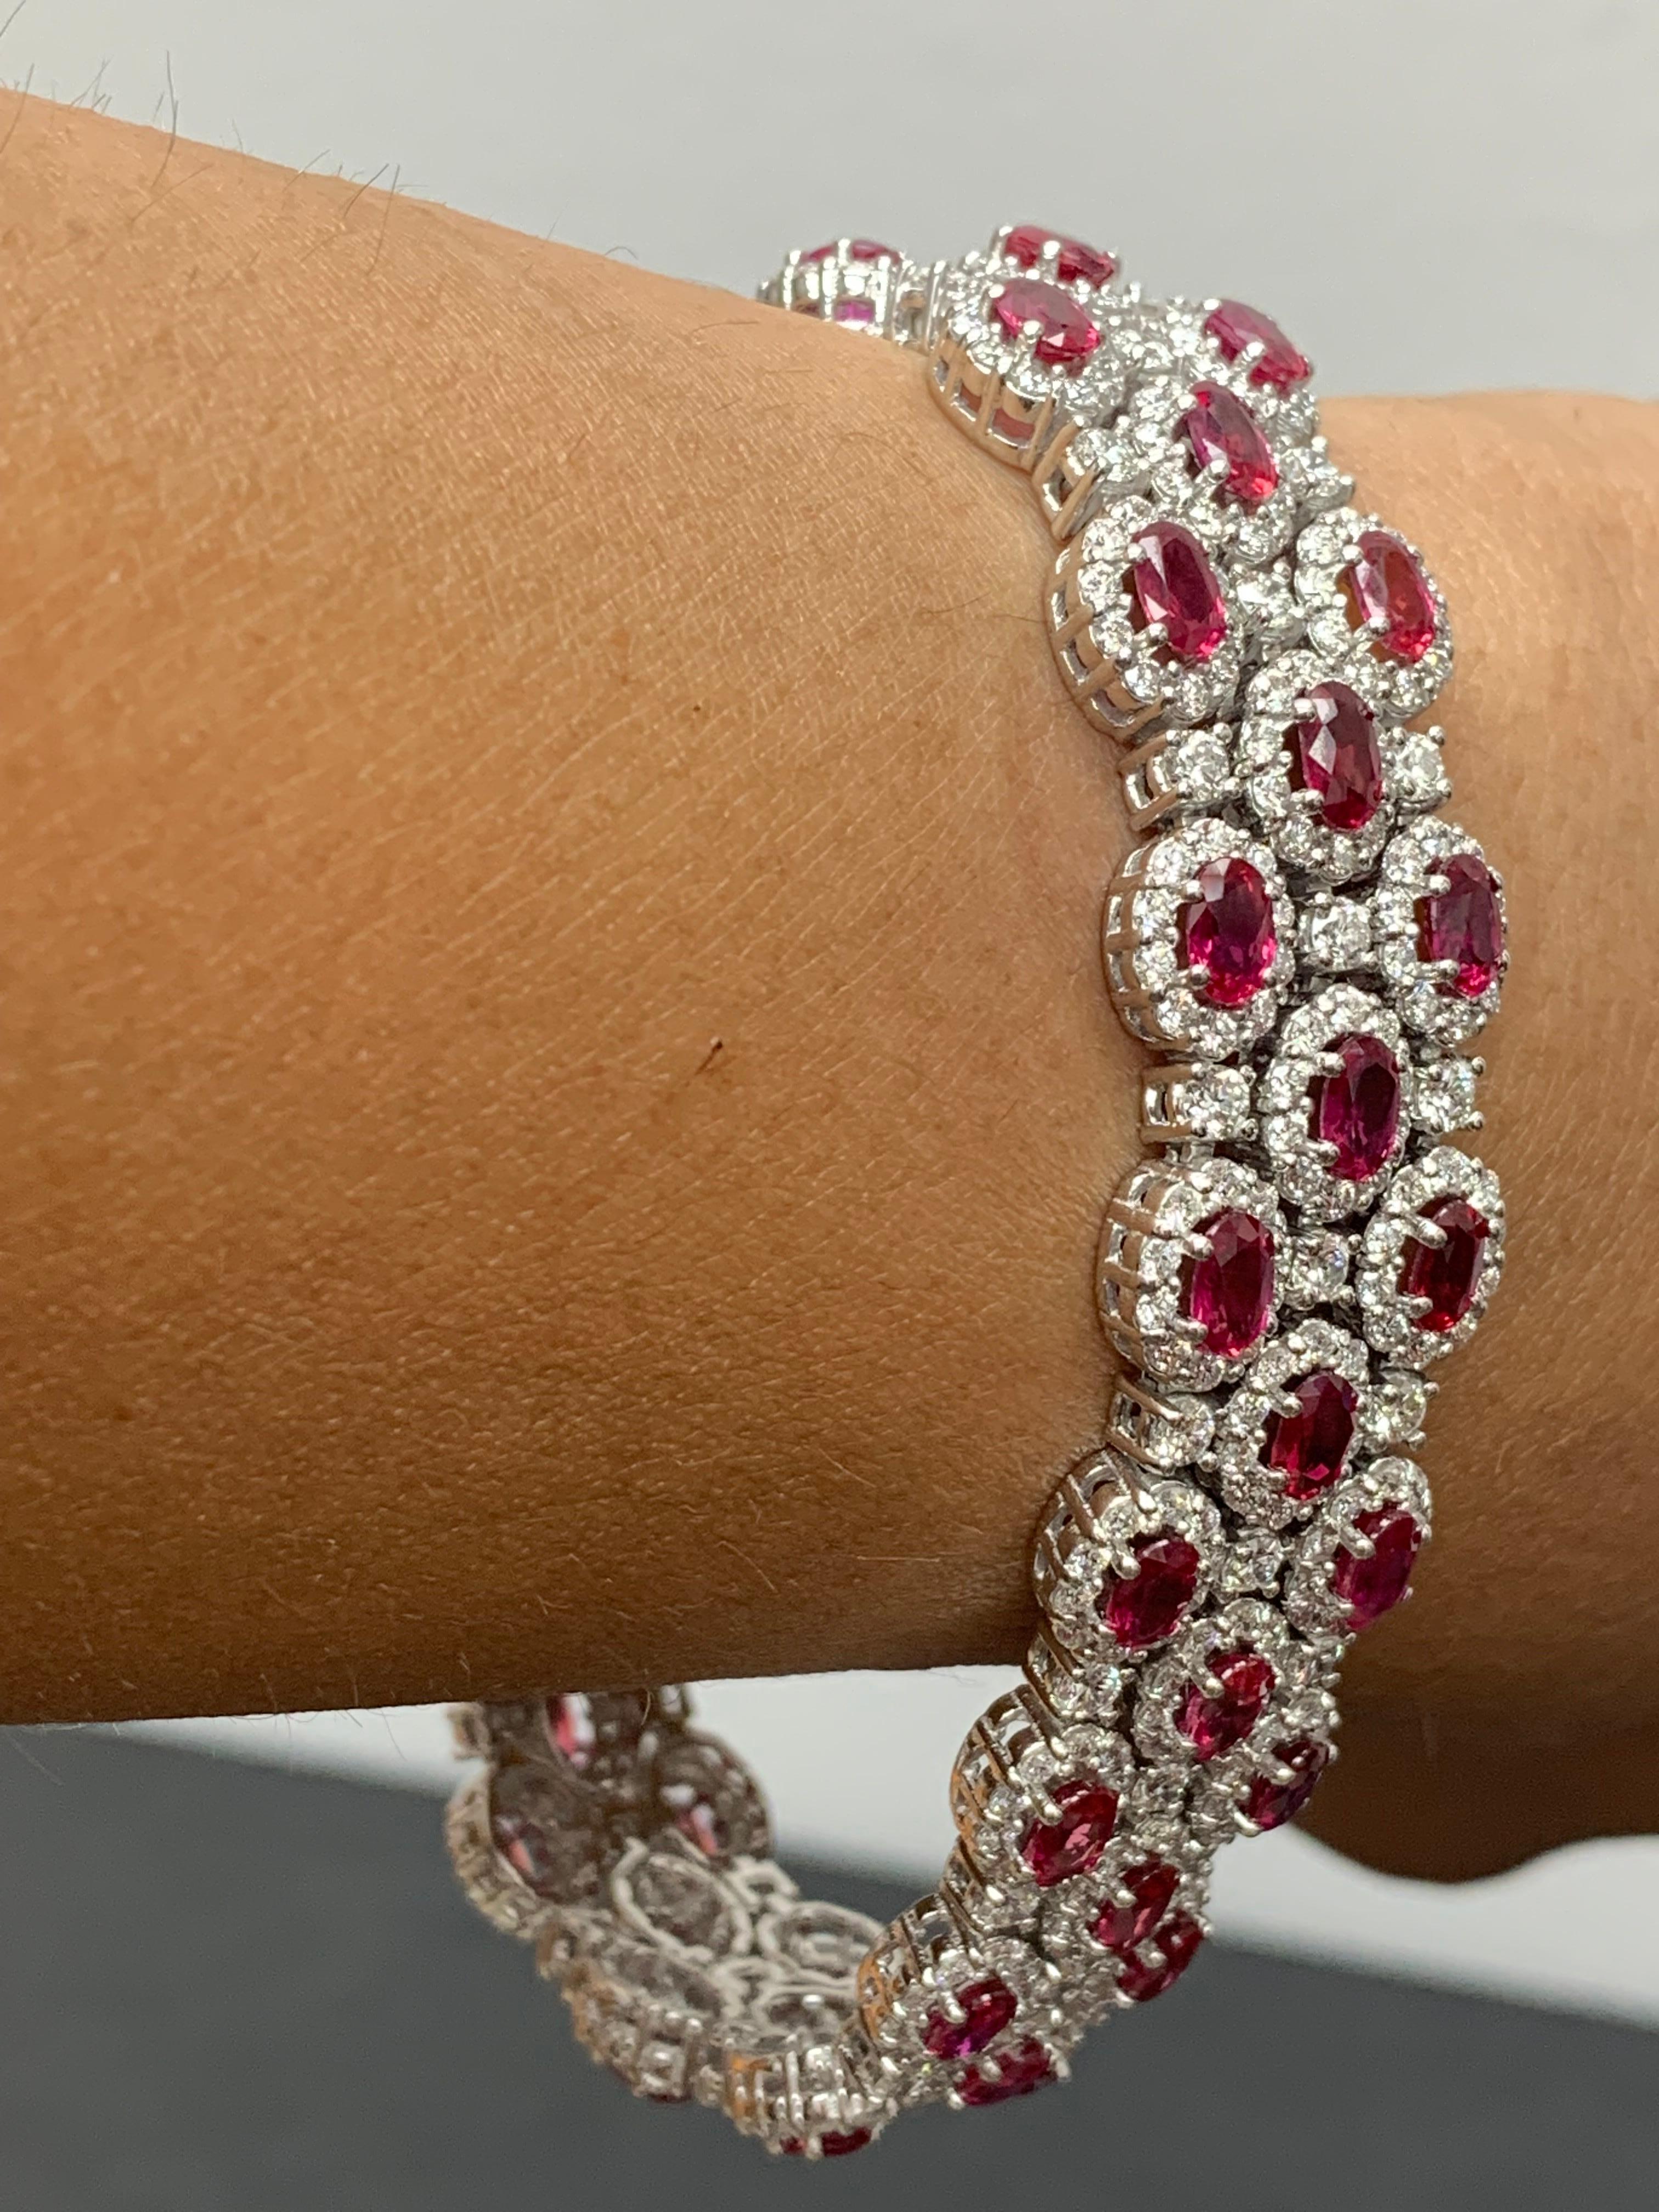 14.91 Carat Oval Cut Ruby and Diamond 3 Row Bracelet in 14K White Gold For Sale 7